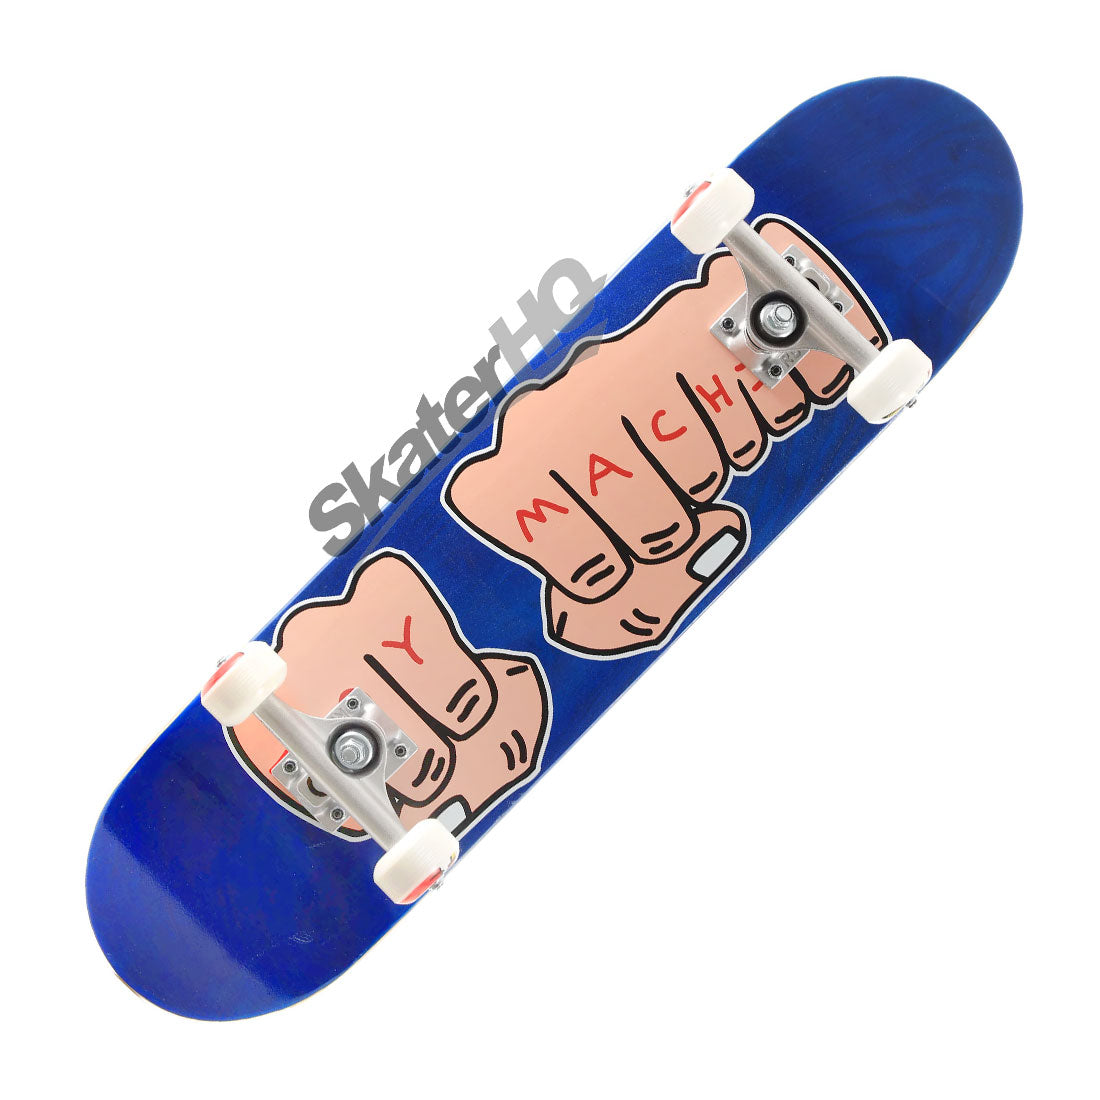 Toy Machine Fists 7.375 Mini Complete - Blue Skateboard Completes Modern Street